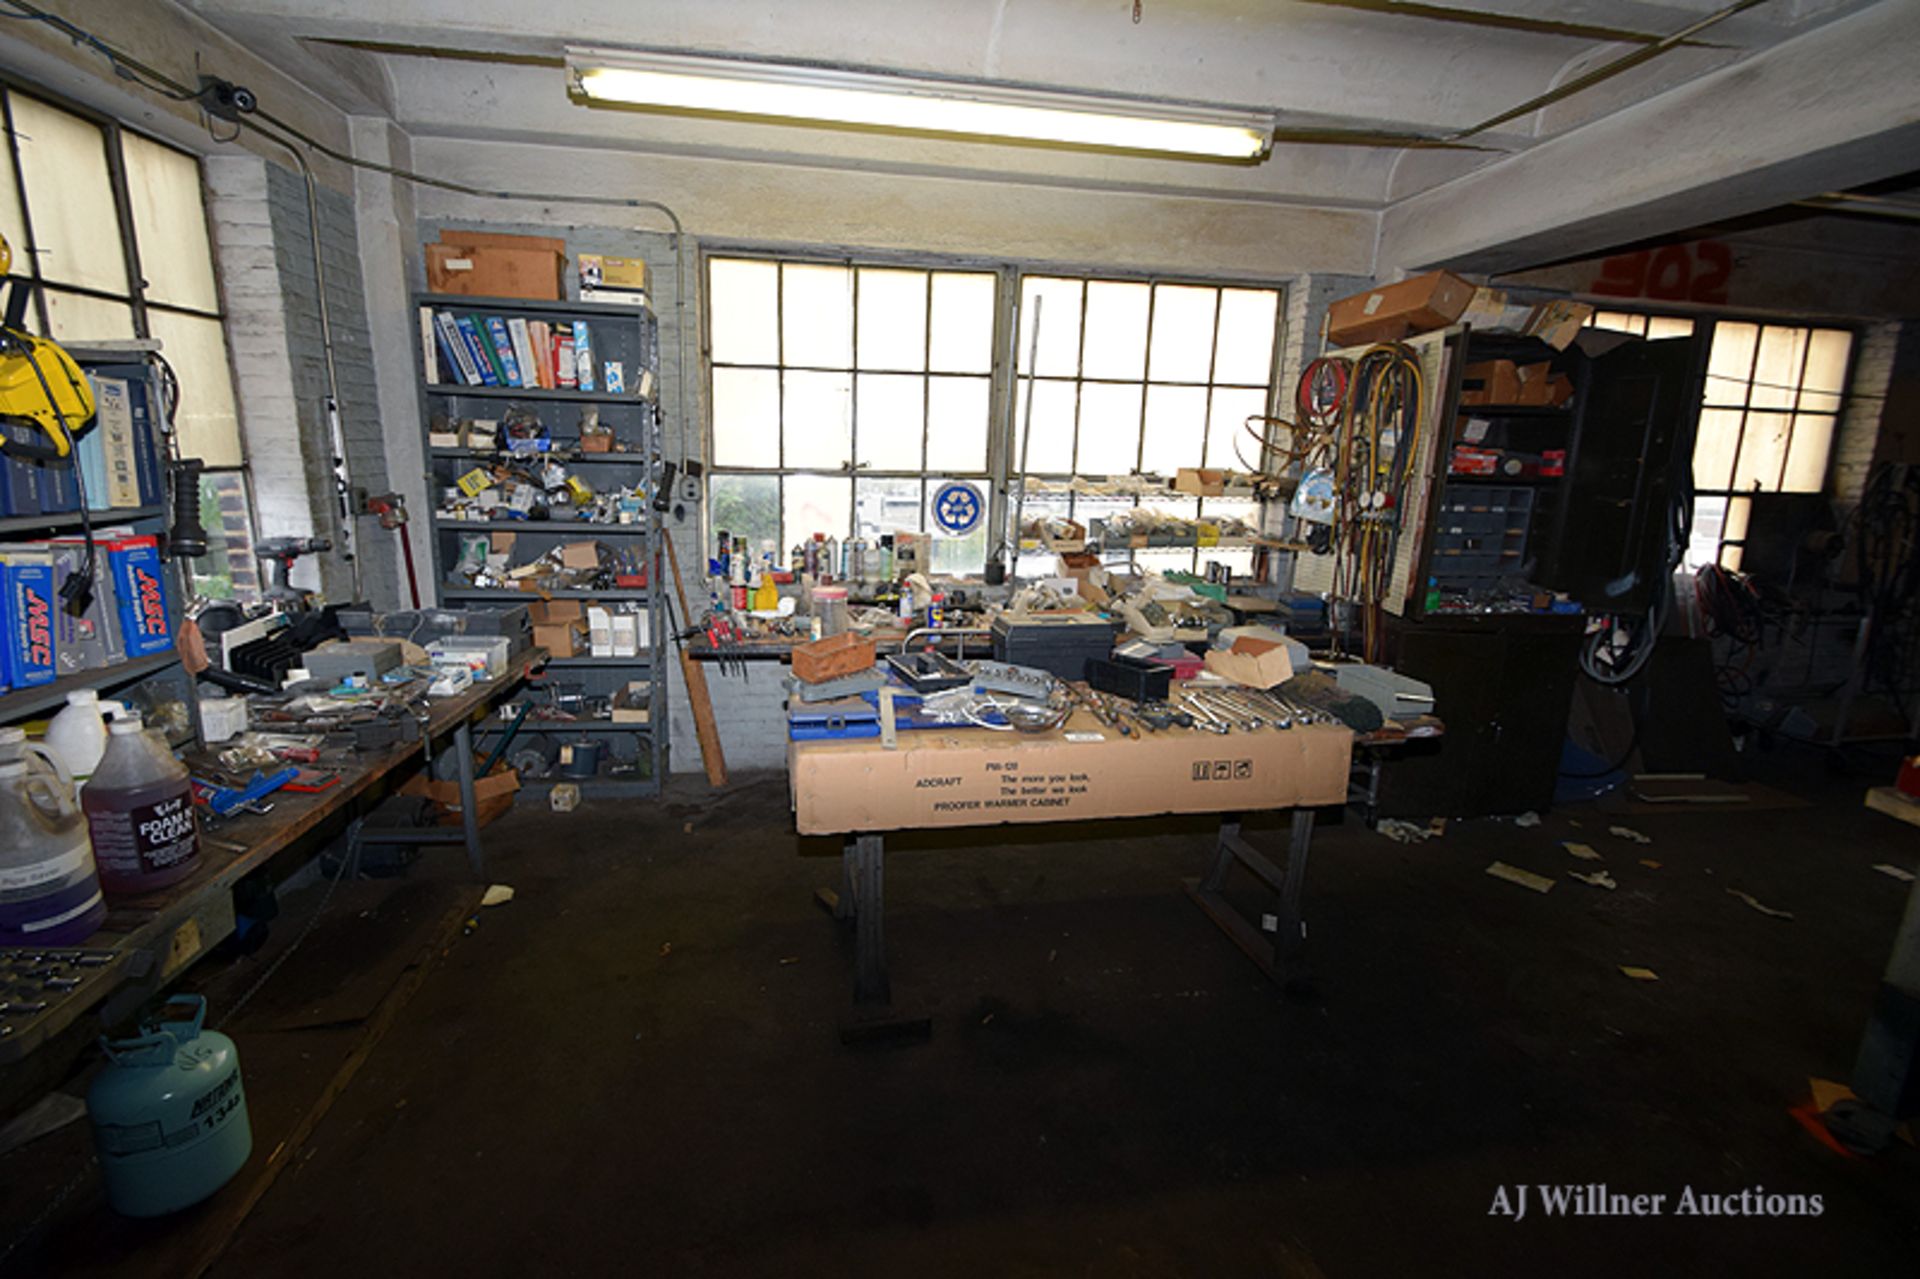 Contents of Workshop; Tools, Vacuums, Parts, Etc. - Image 3 of 13